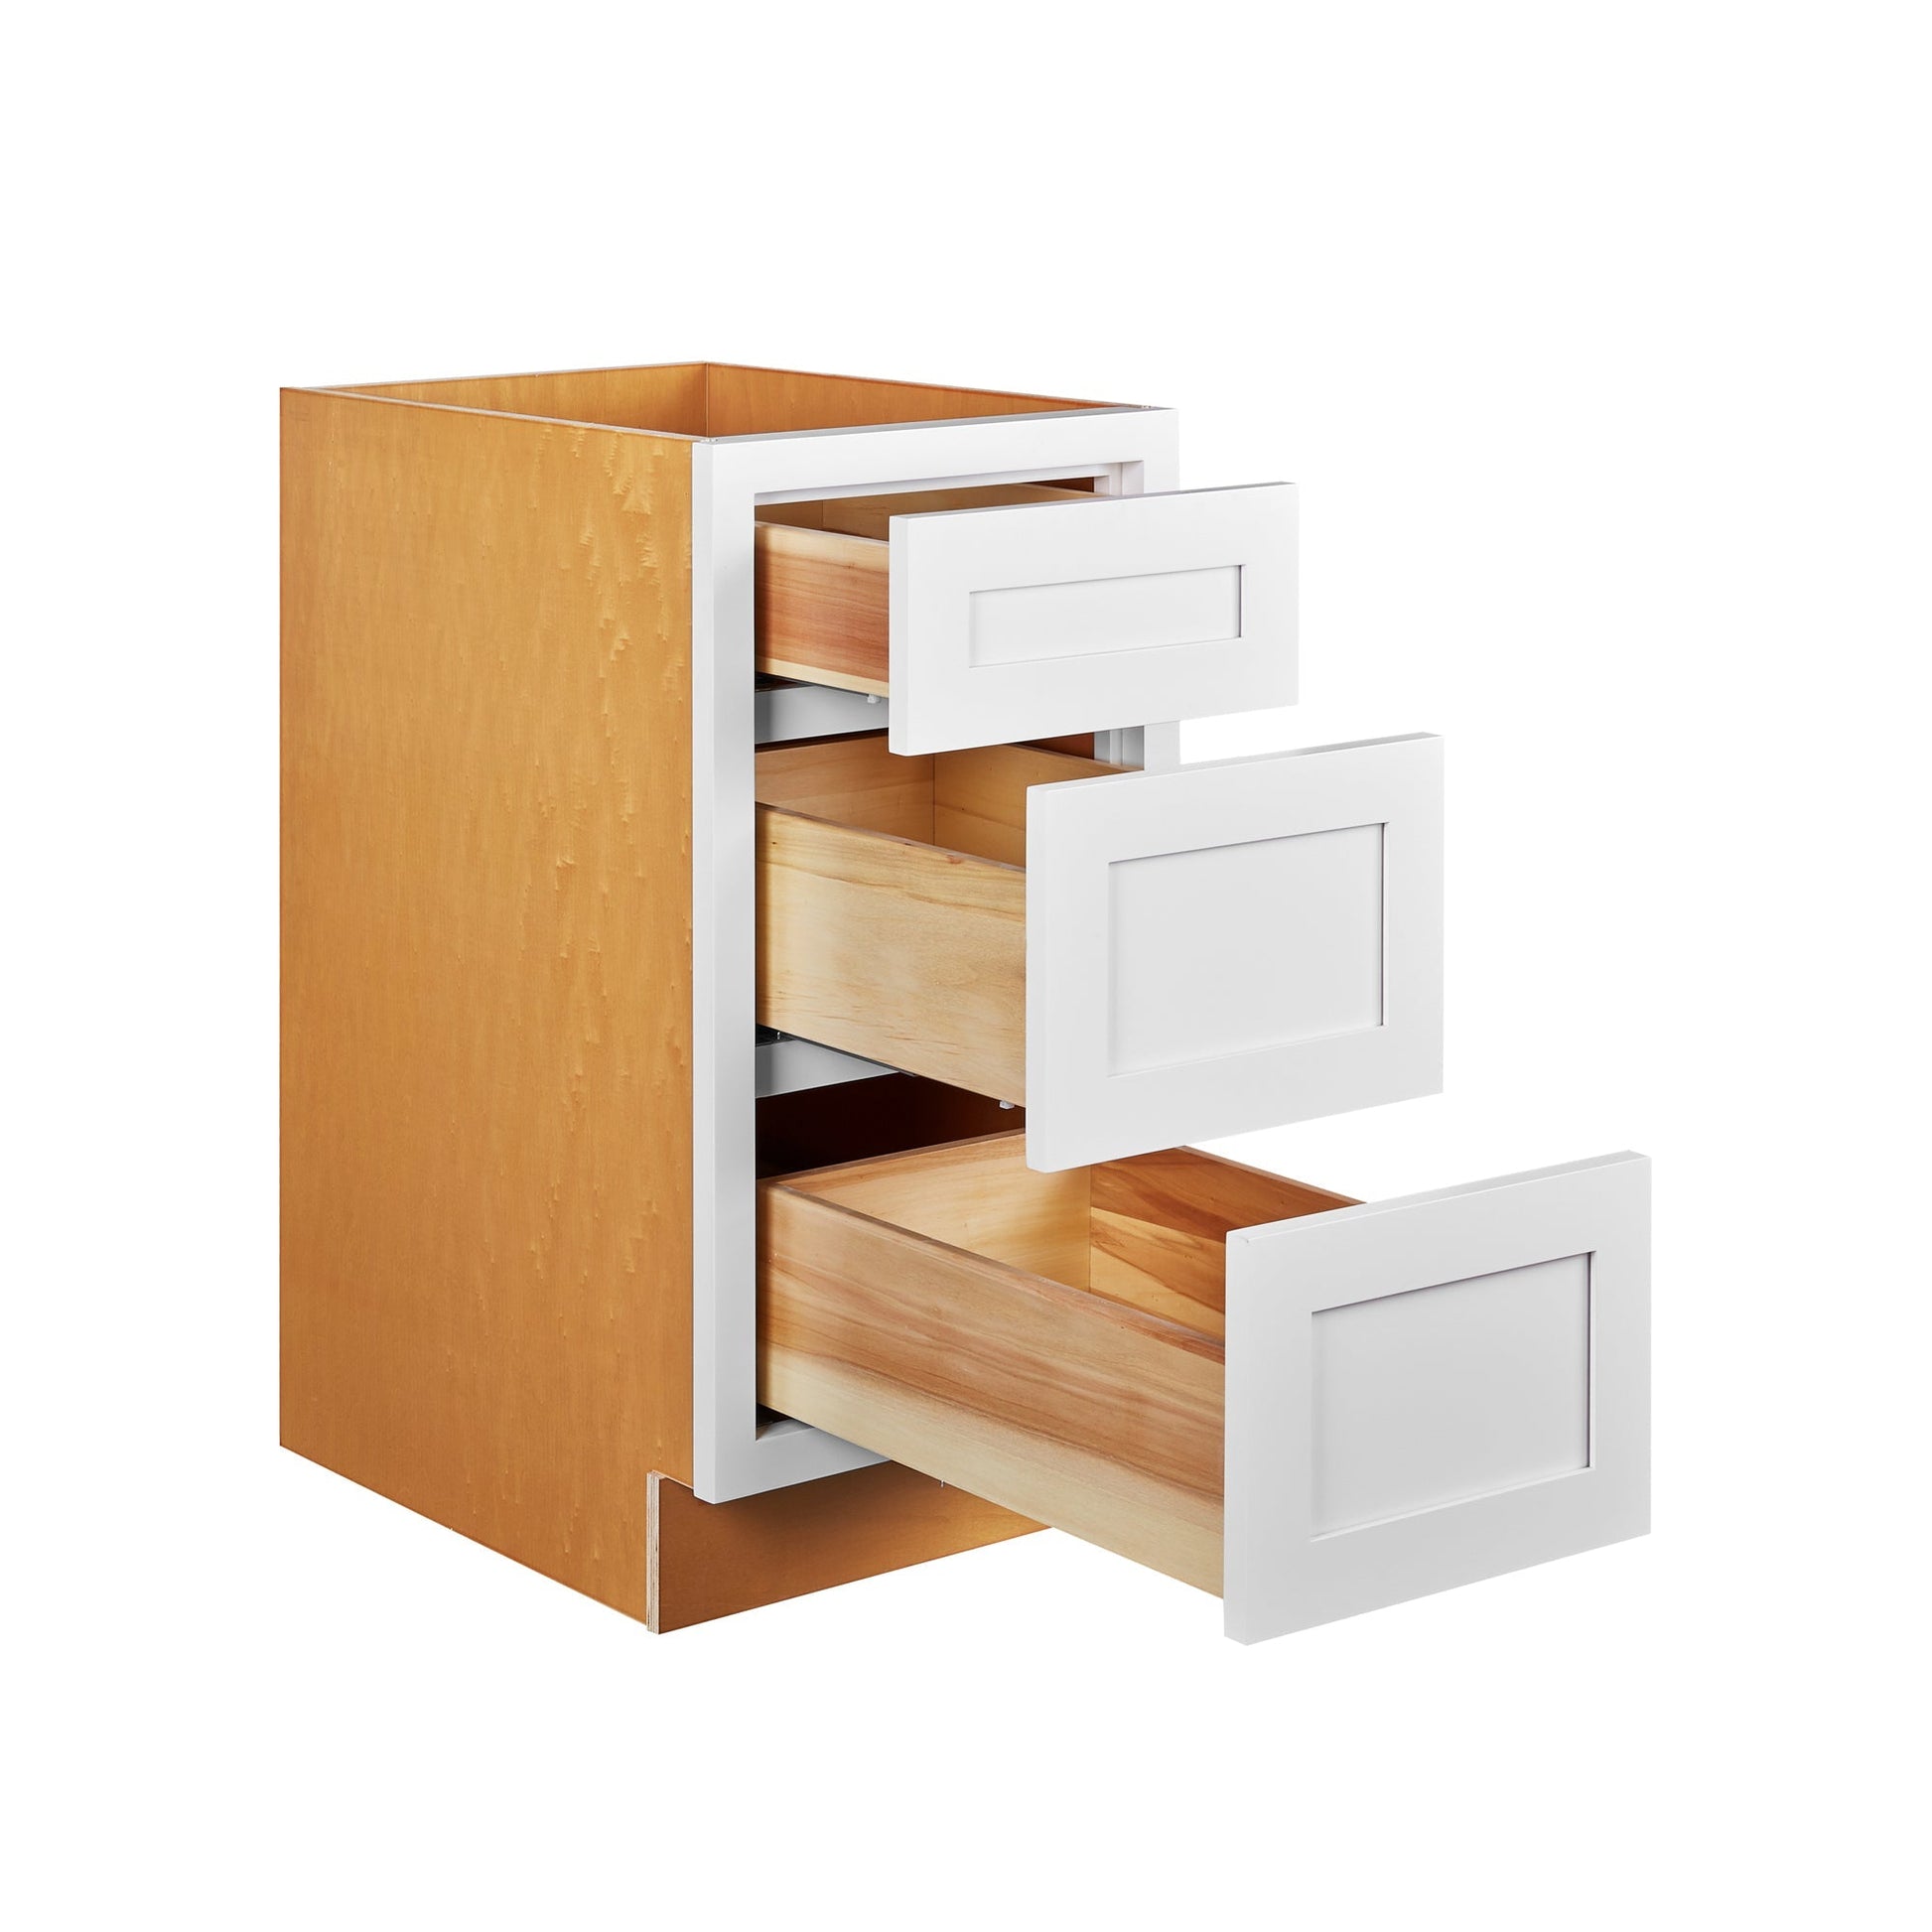 https://kitchenoasis.com/cdn/shop/files/Maplevilles-Cabinetry-15-Snow-White-Inset-Modern-Shaker-Style-RTA-Birch-Wood-Storage-Base-Kitchen-Cabinet-With-3-Drawers-2.jpg?v=1685856083&width=1946